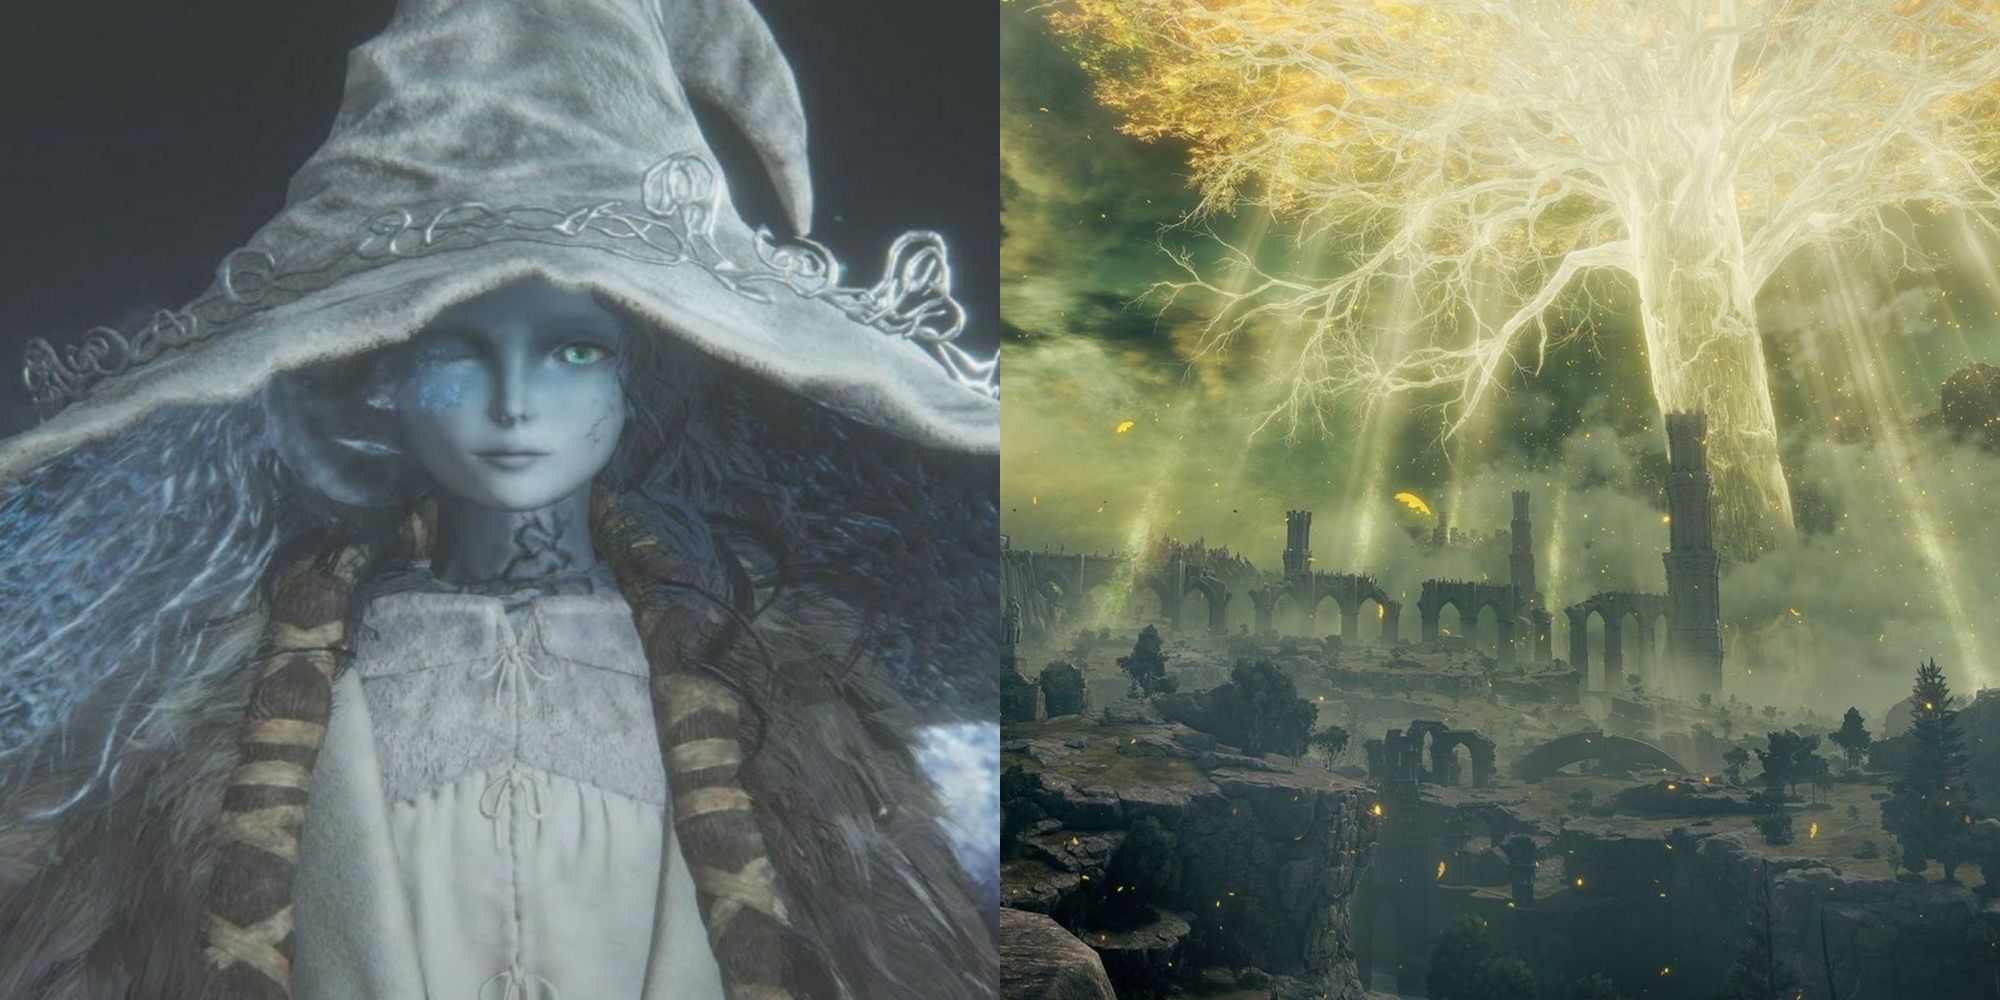 Elden Ring Ranni the witch with one eye closed, and the Erdtree seen over Limgrave